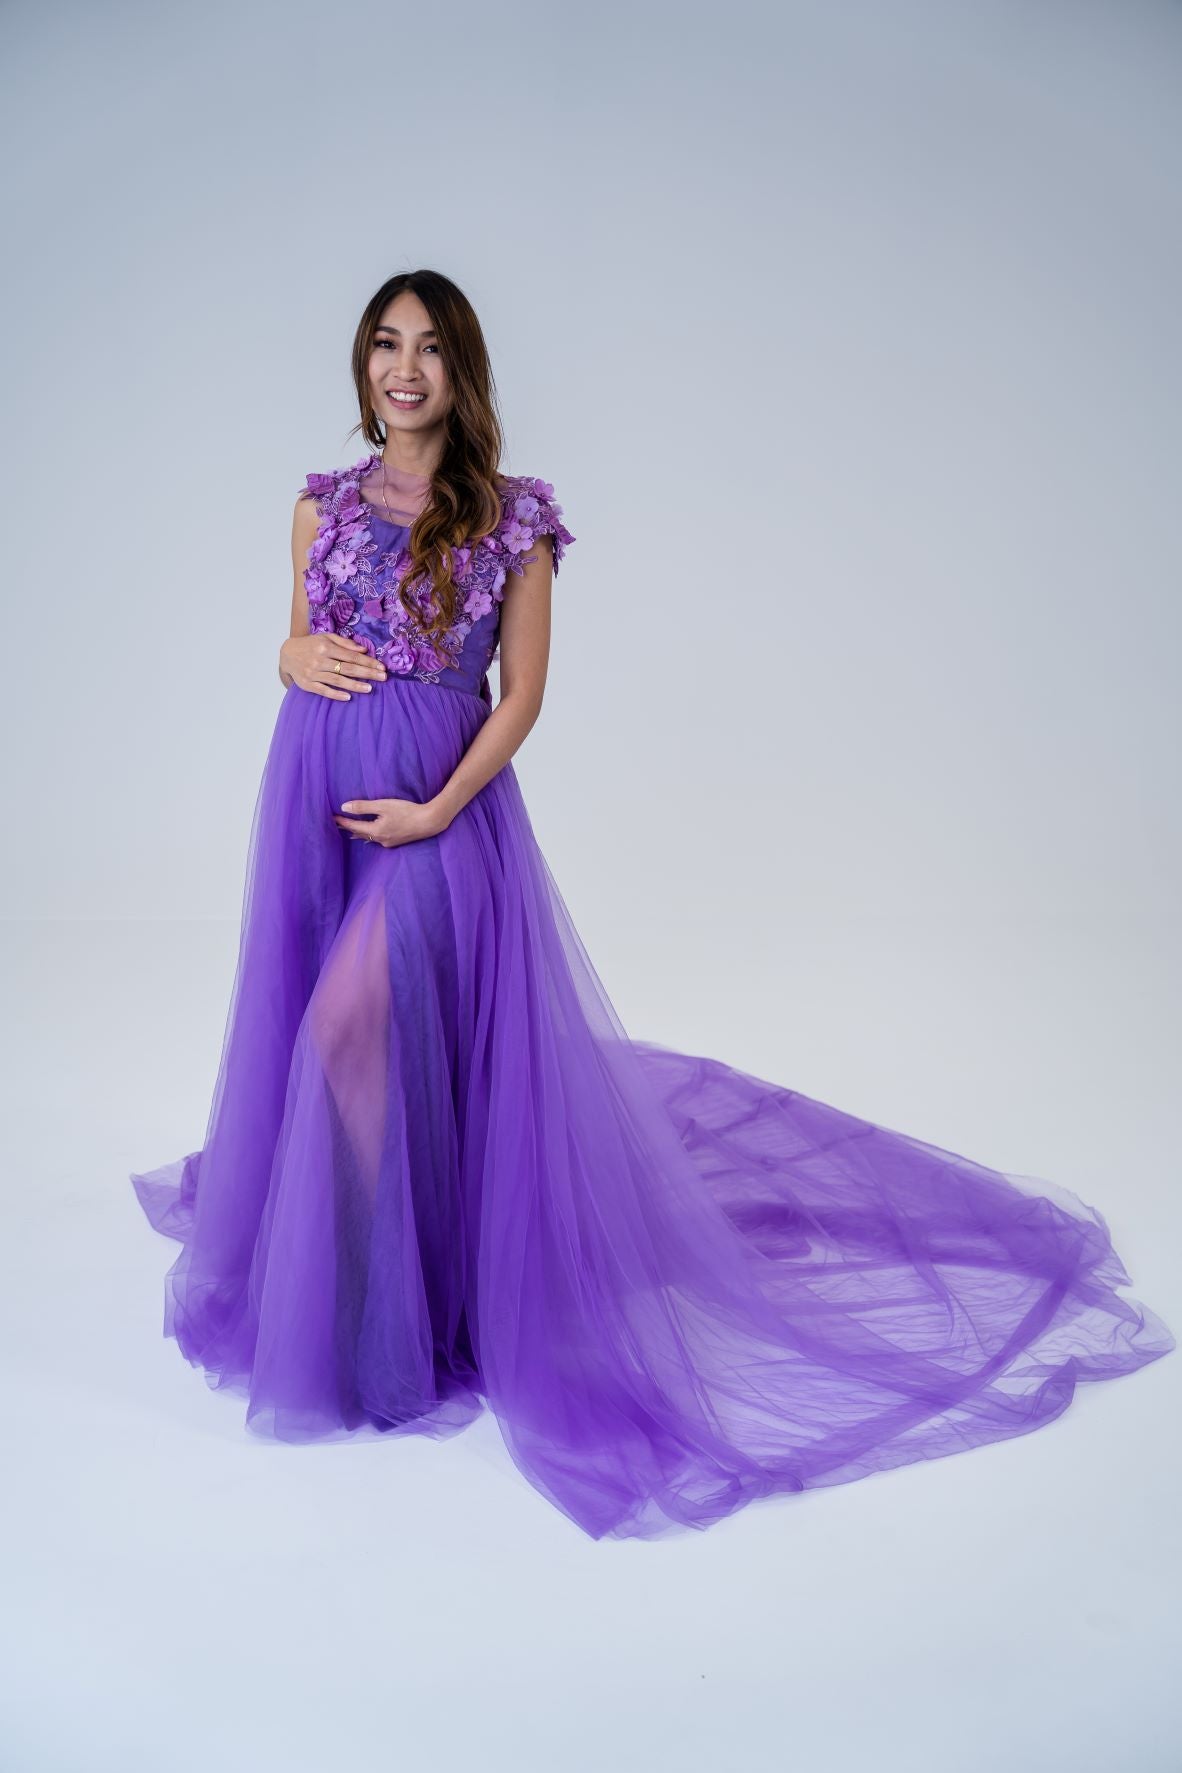 Maternity Photoshoot Dresses - Forrest - Purple Tulle Dress - 4 DAY RENTAL - Luxe Bumps AU